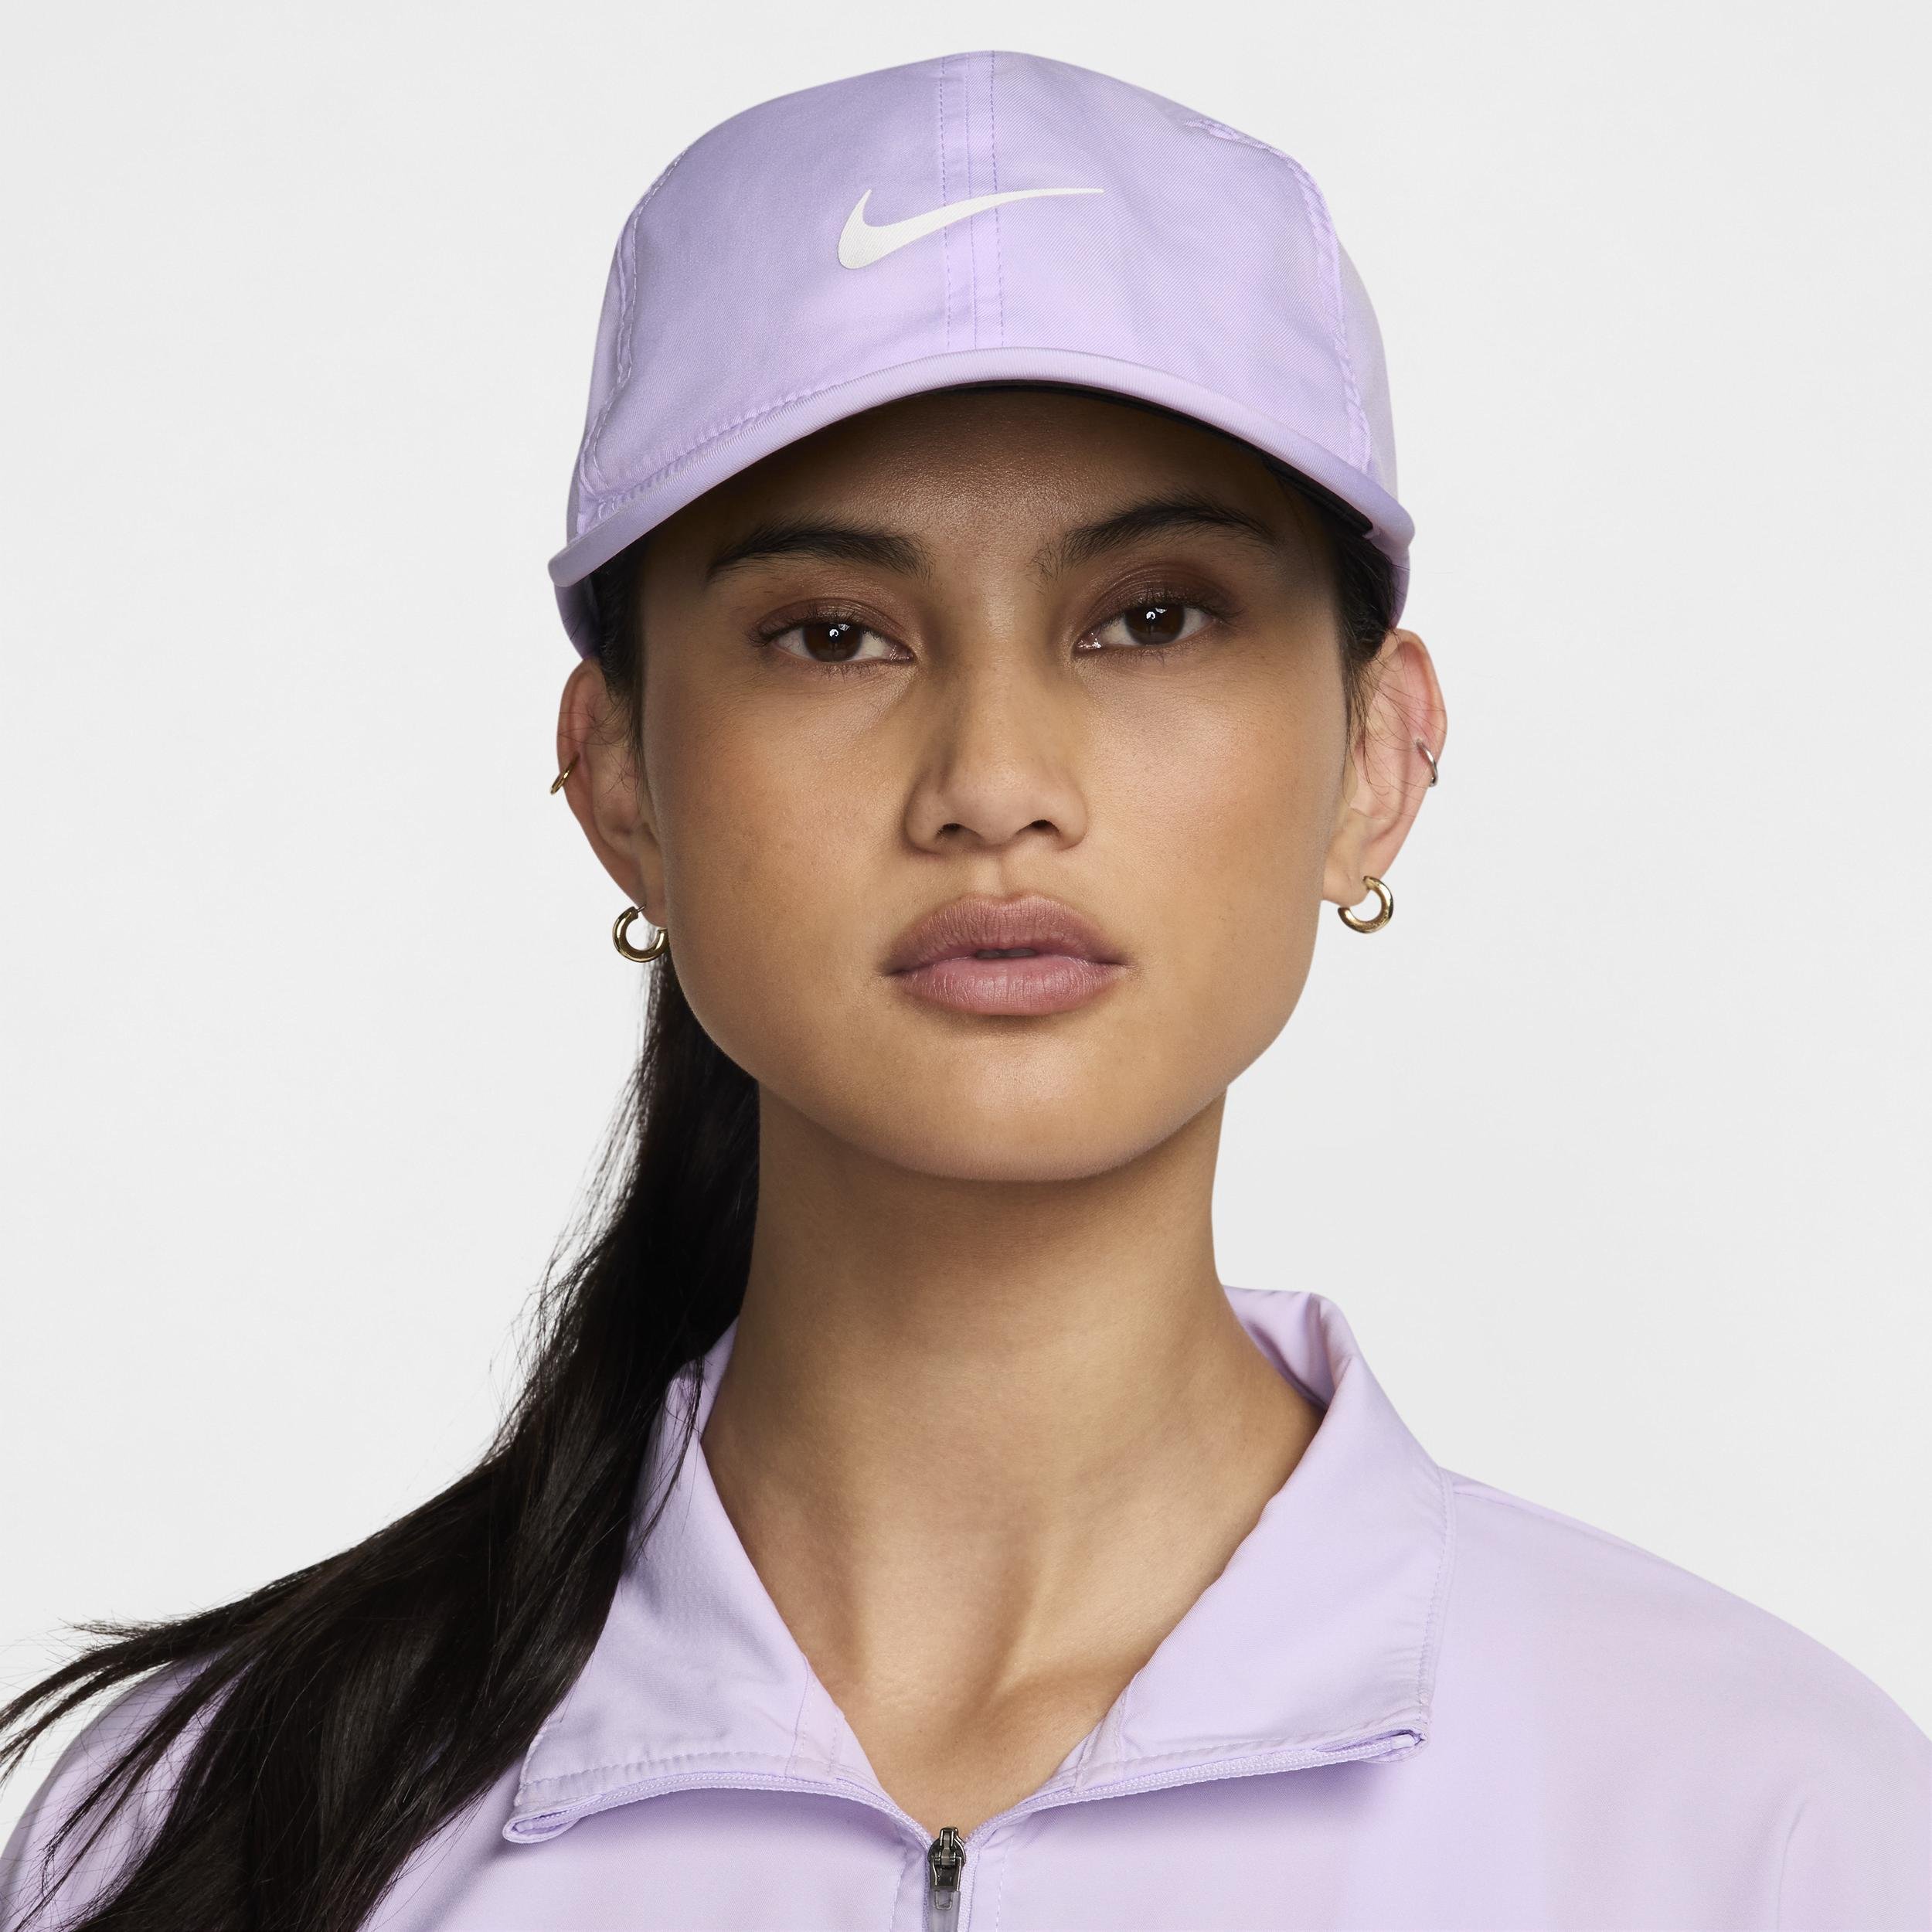 Nike Unisex Dri-FIT Club Unstructured Featherlight Cap by NIKE